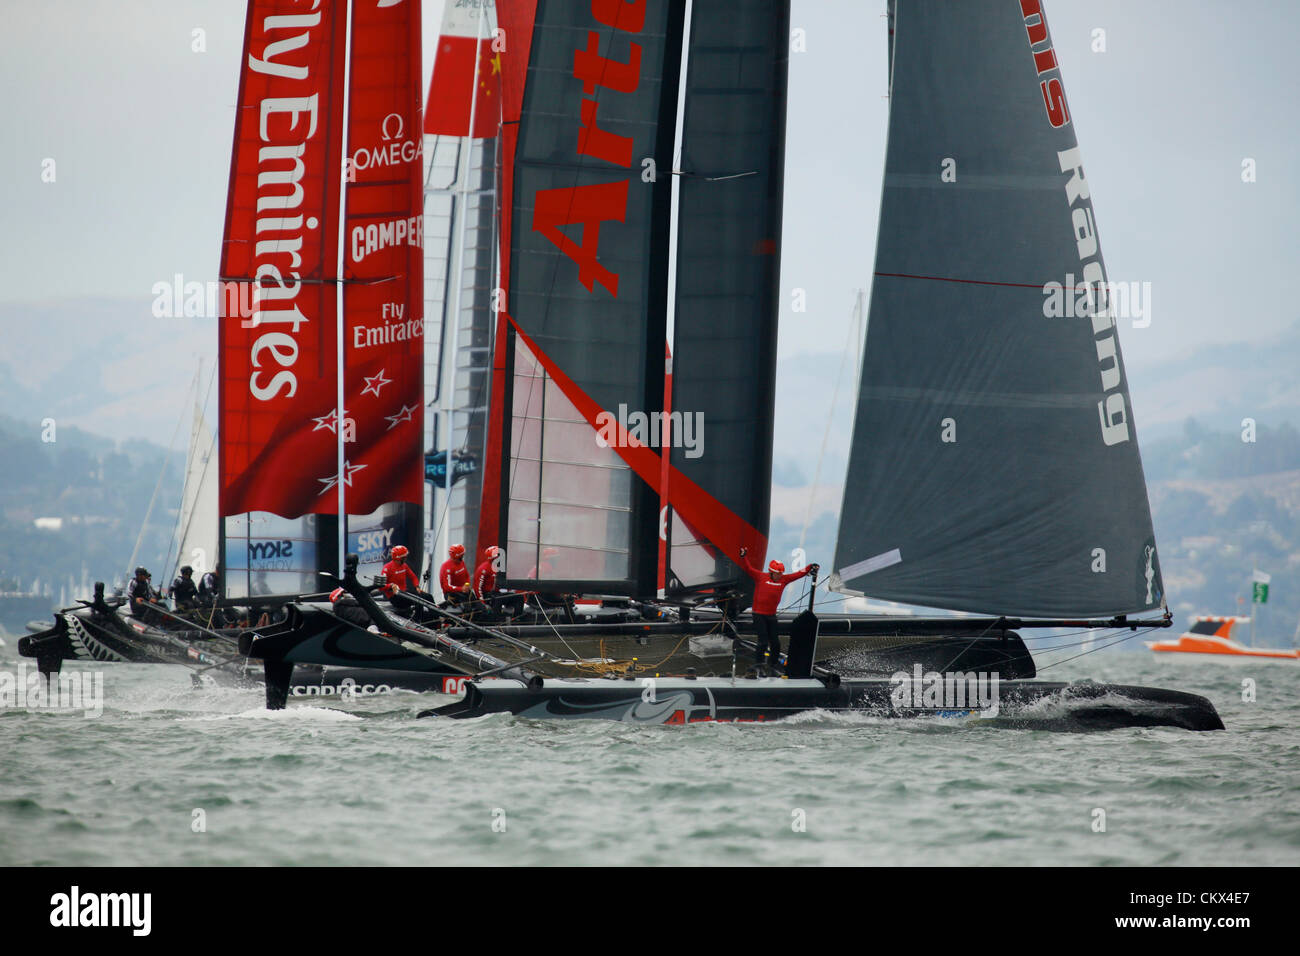 Aug. 25, 2012 - San Francisco, California, U.S - America's Cup World Series, San Francisco, CA August 25, 2012.  Action from the final Fleet Heat of the day.  ORACLE TEAM USA SPITHILL (Jimmy Spithill) wins the race  (Credit Image: © Dinno Kovic/ZUMAPRESS.com) Stock Photo